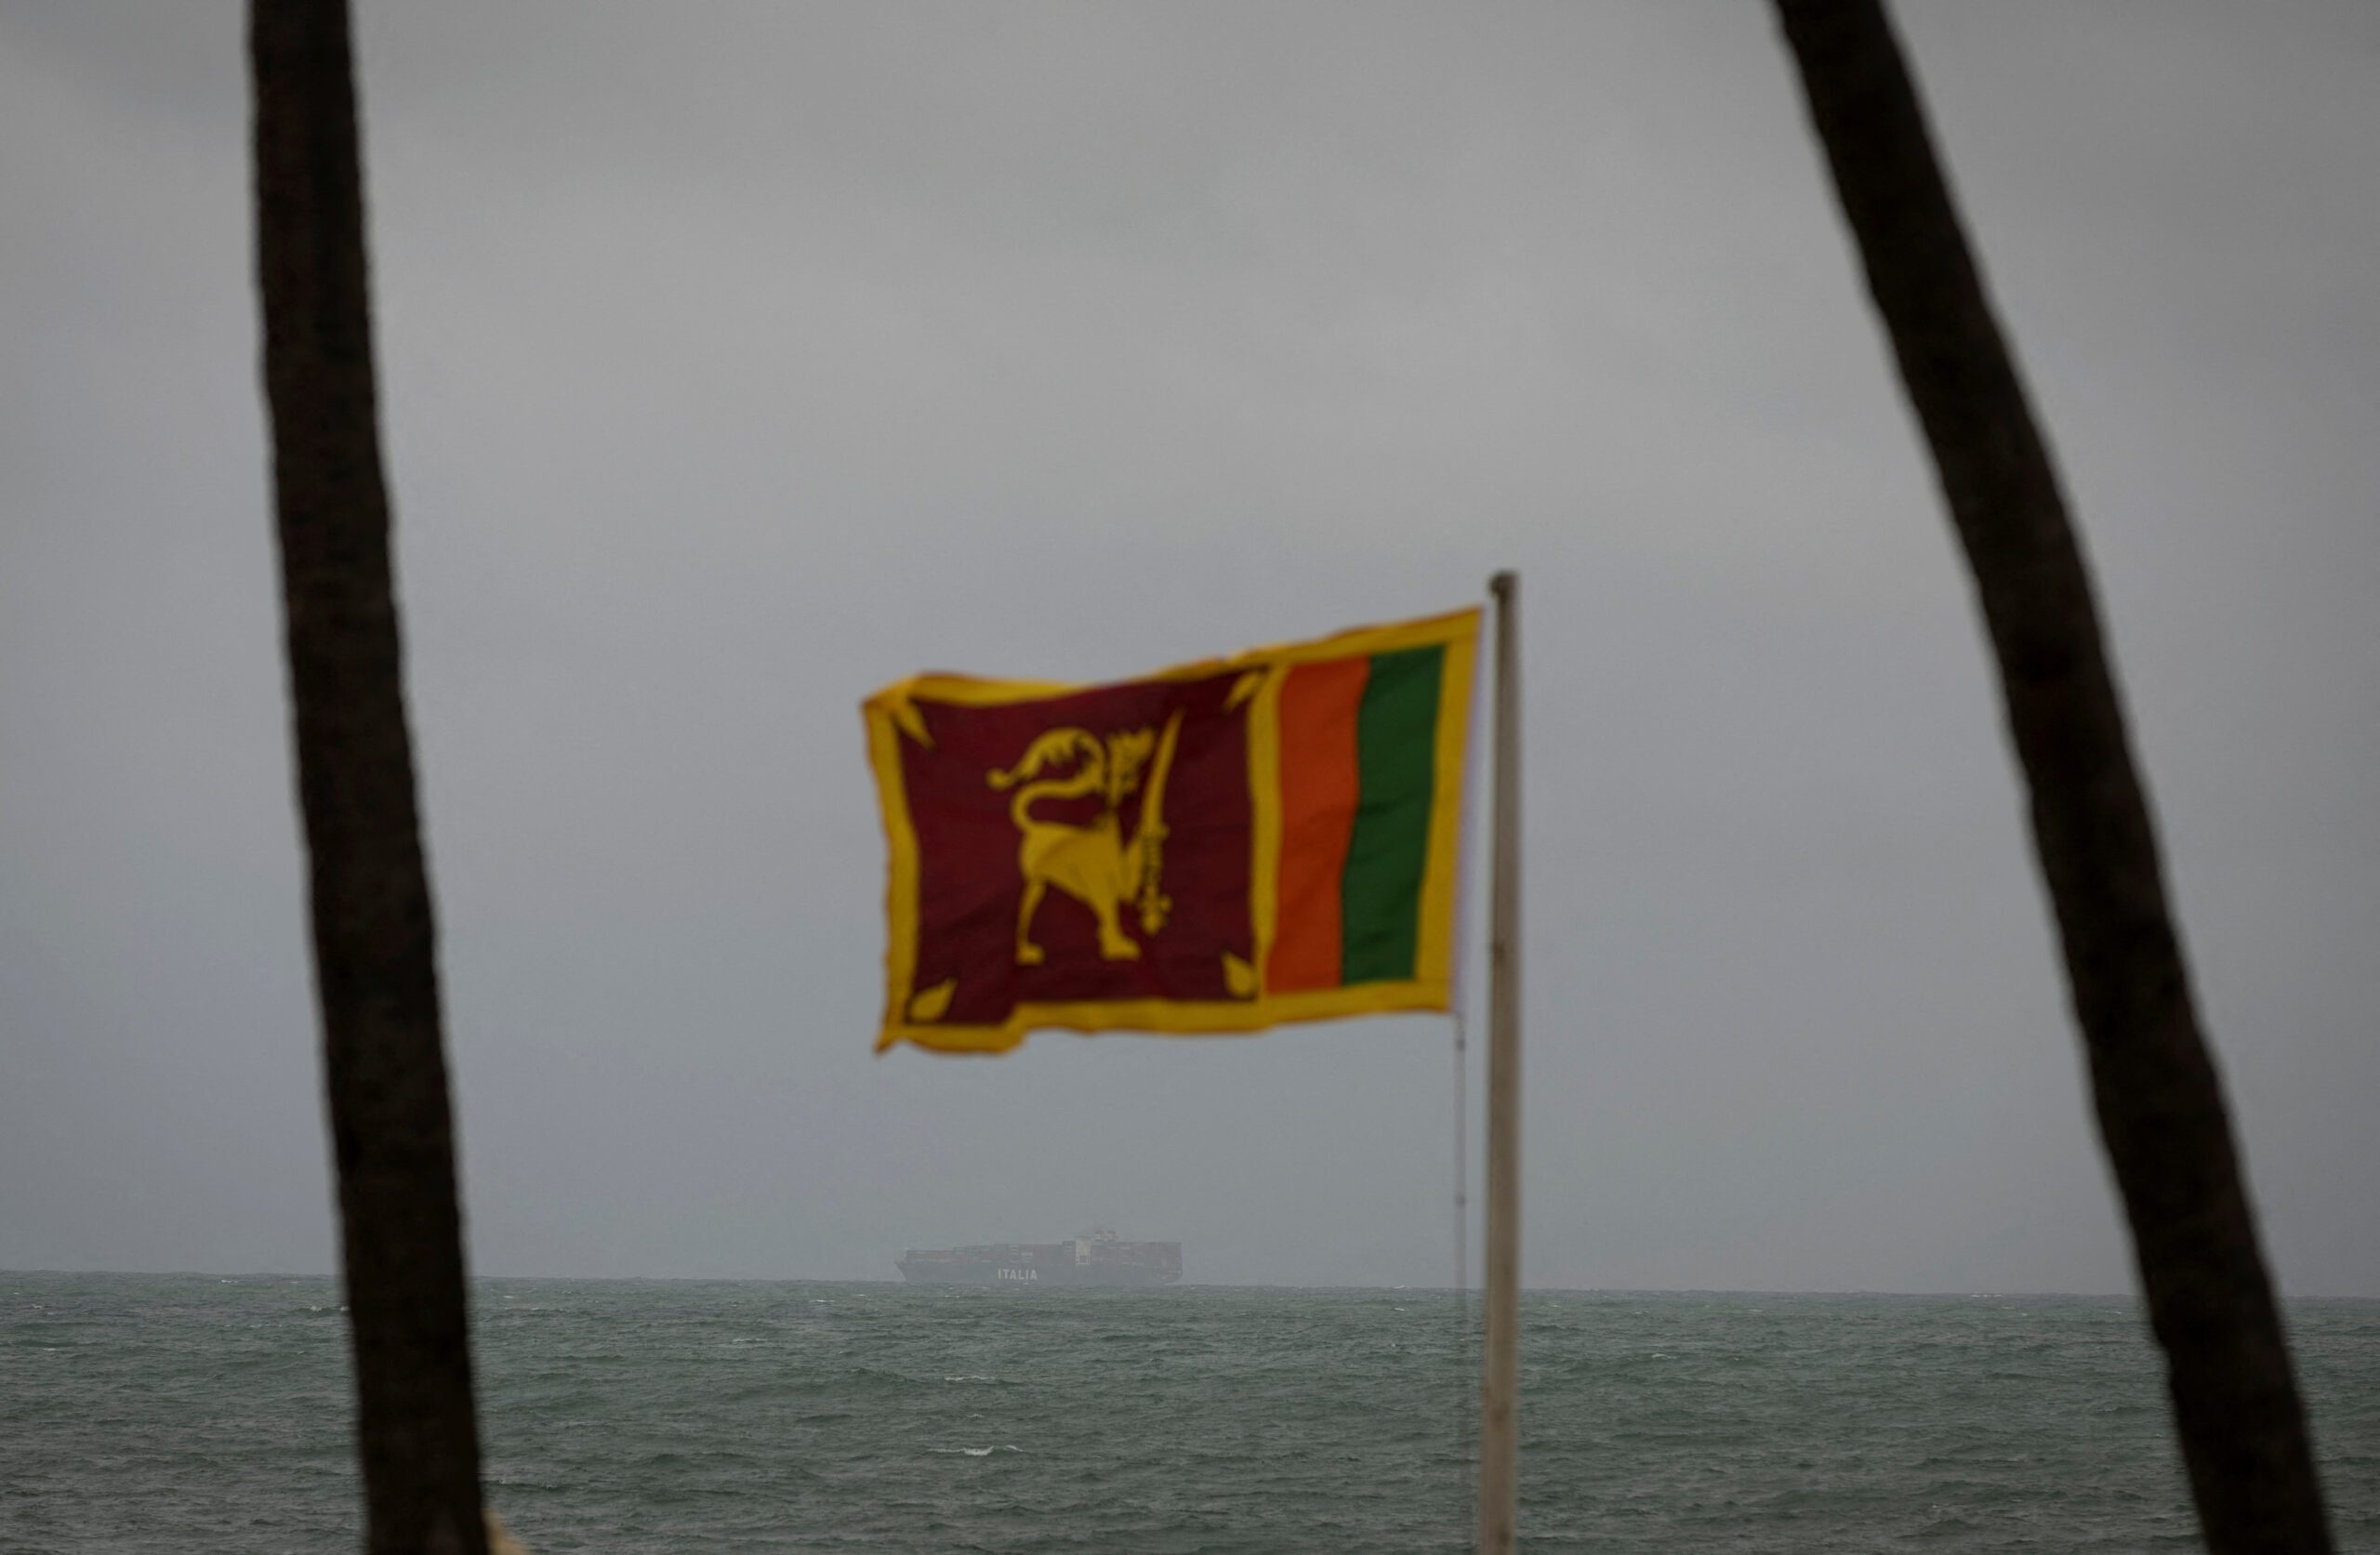 Sri Lanka asks China to defer arrival of ship after India objects